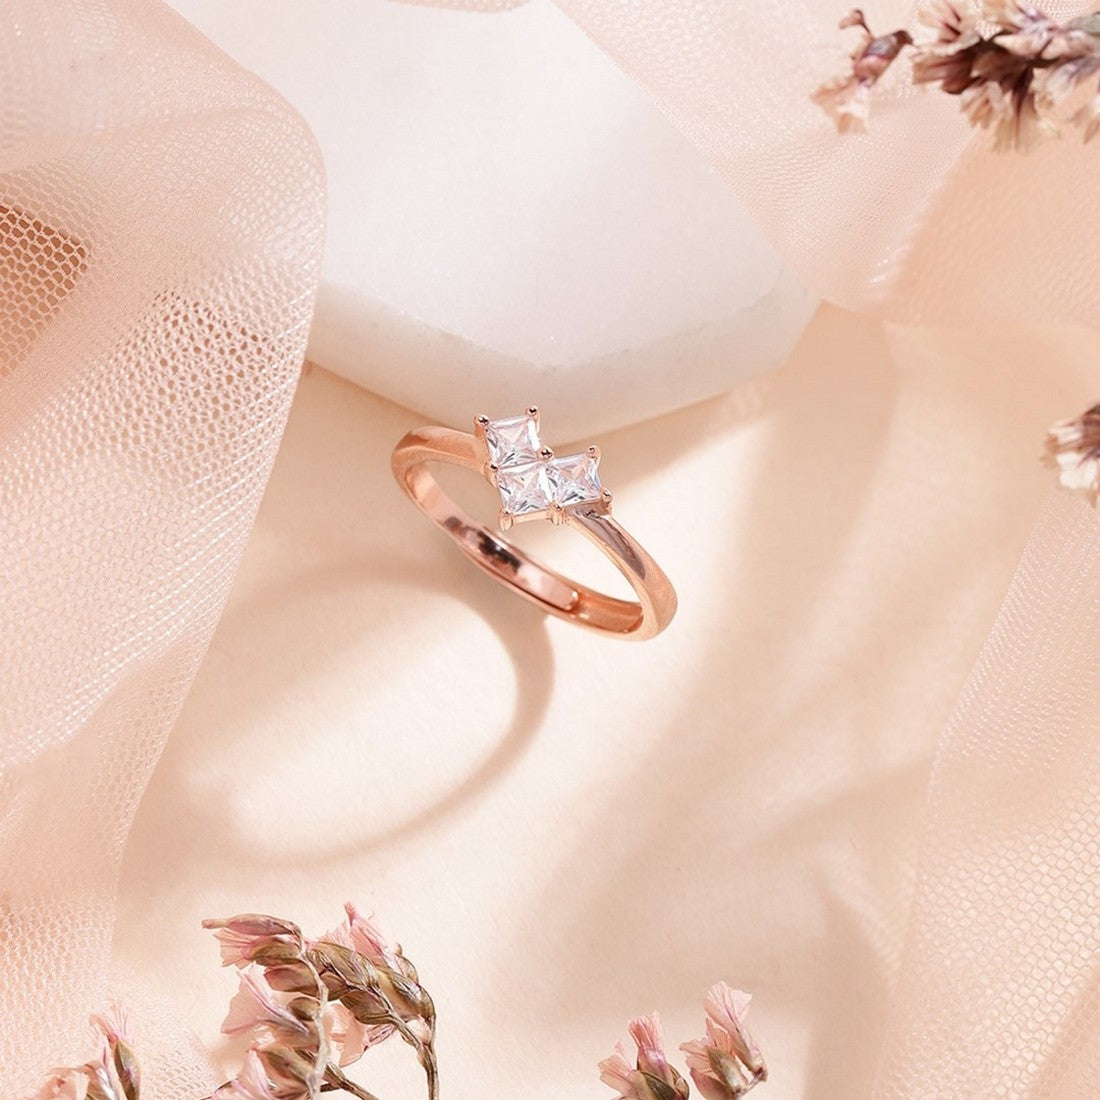 Heartcore 925 Silver Ring in Rose Gold (Adjustable)